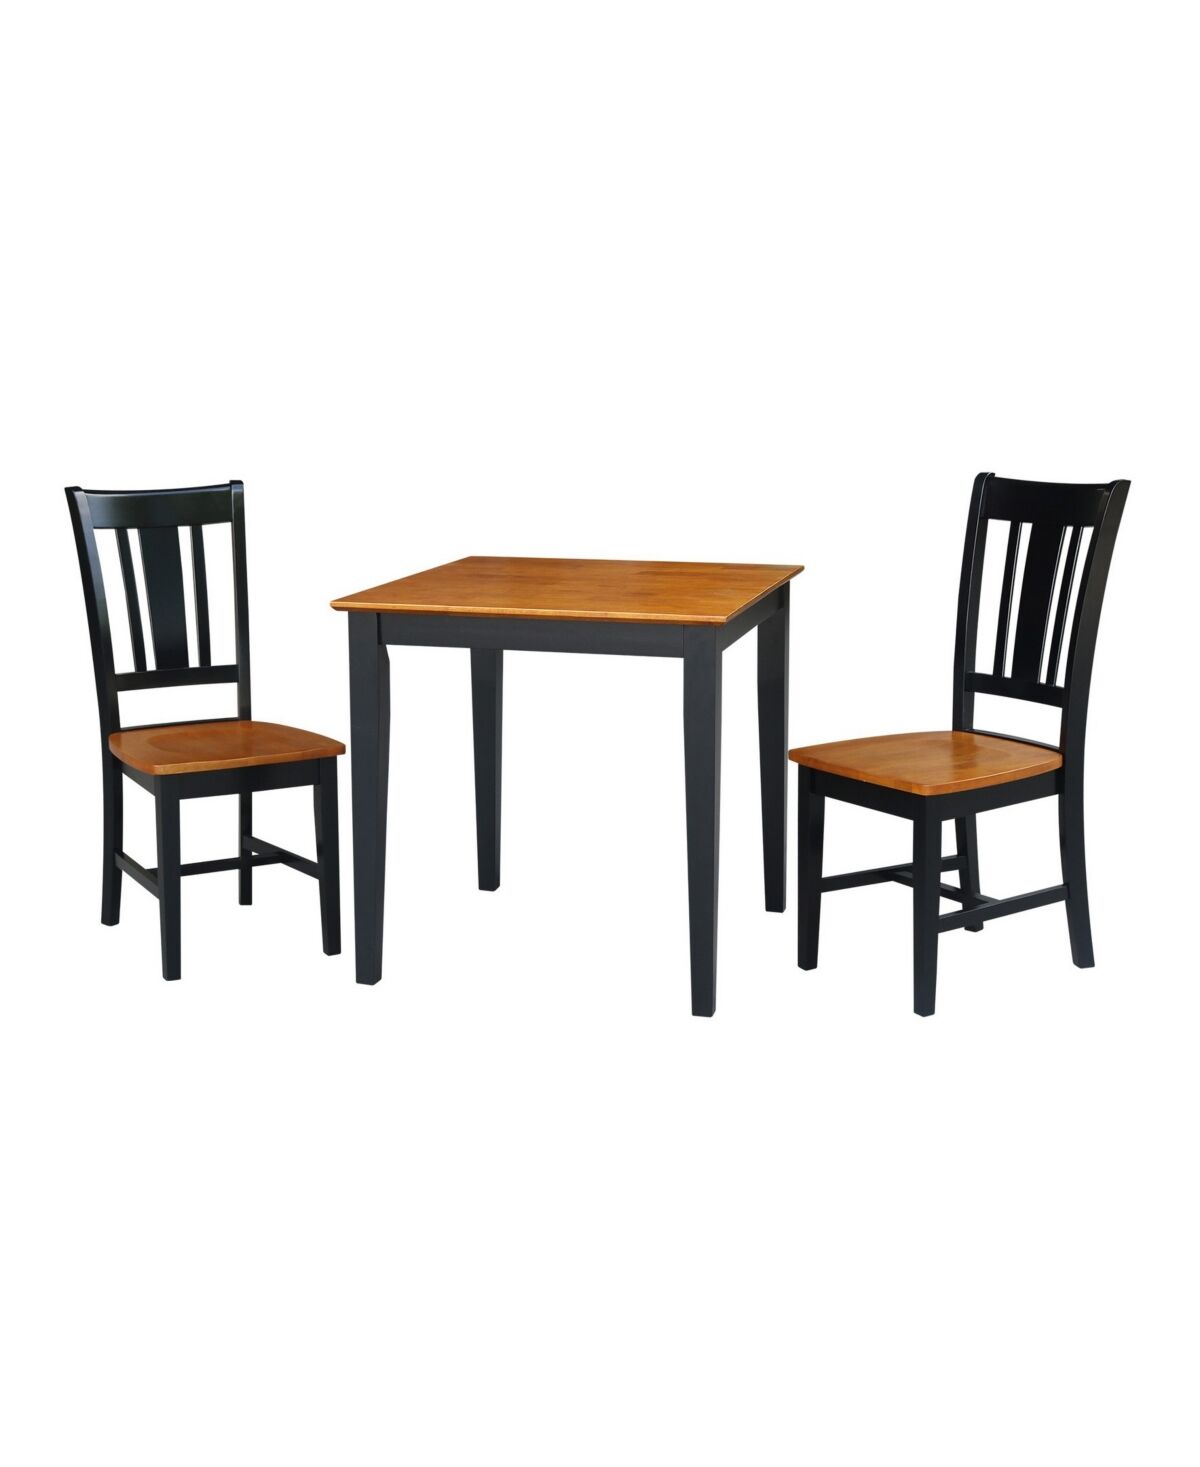 International Concepts Dining Table with 2 Chairs - Black